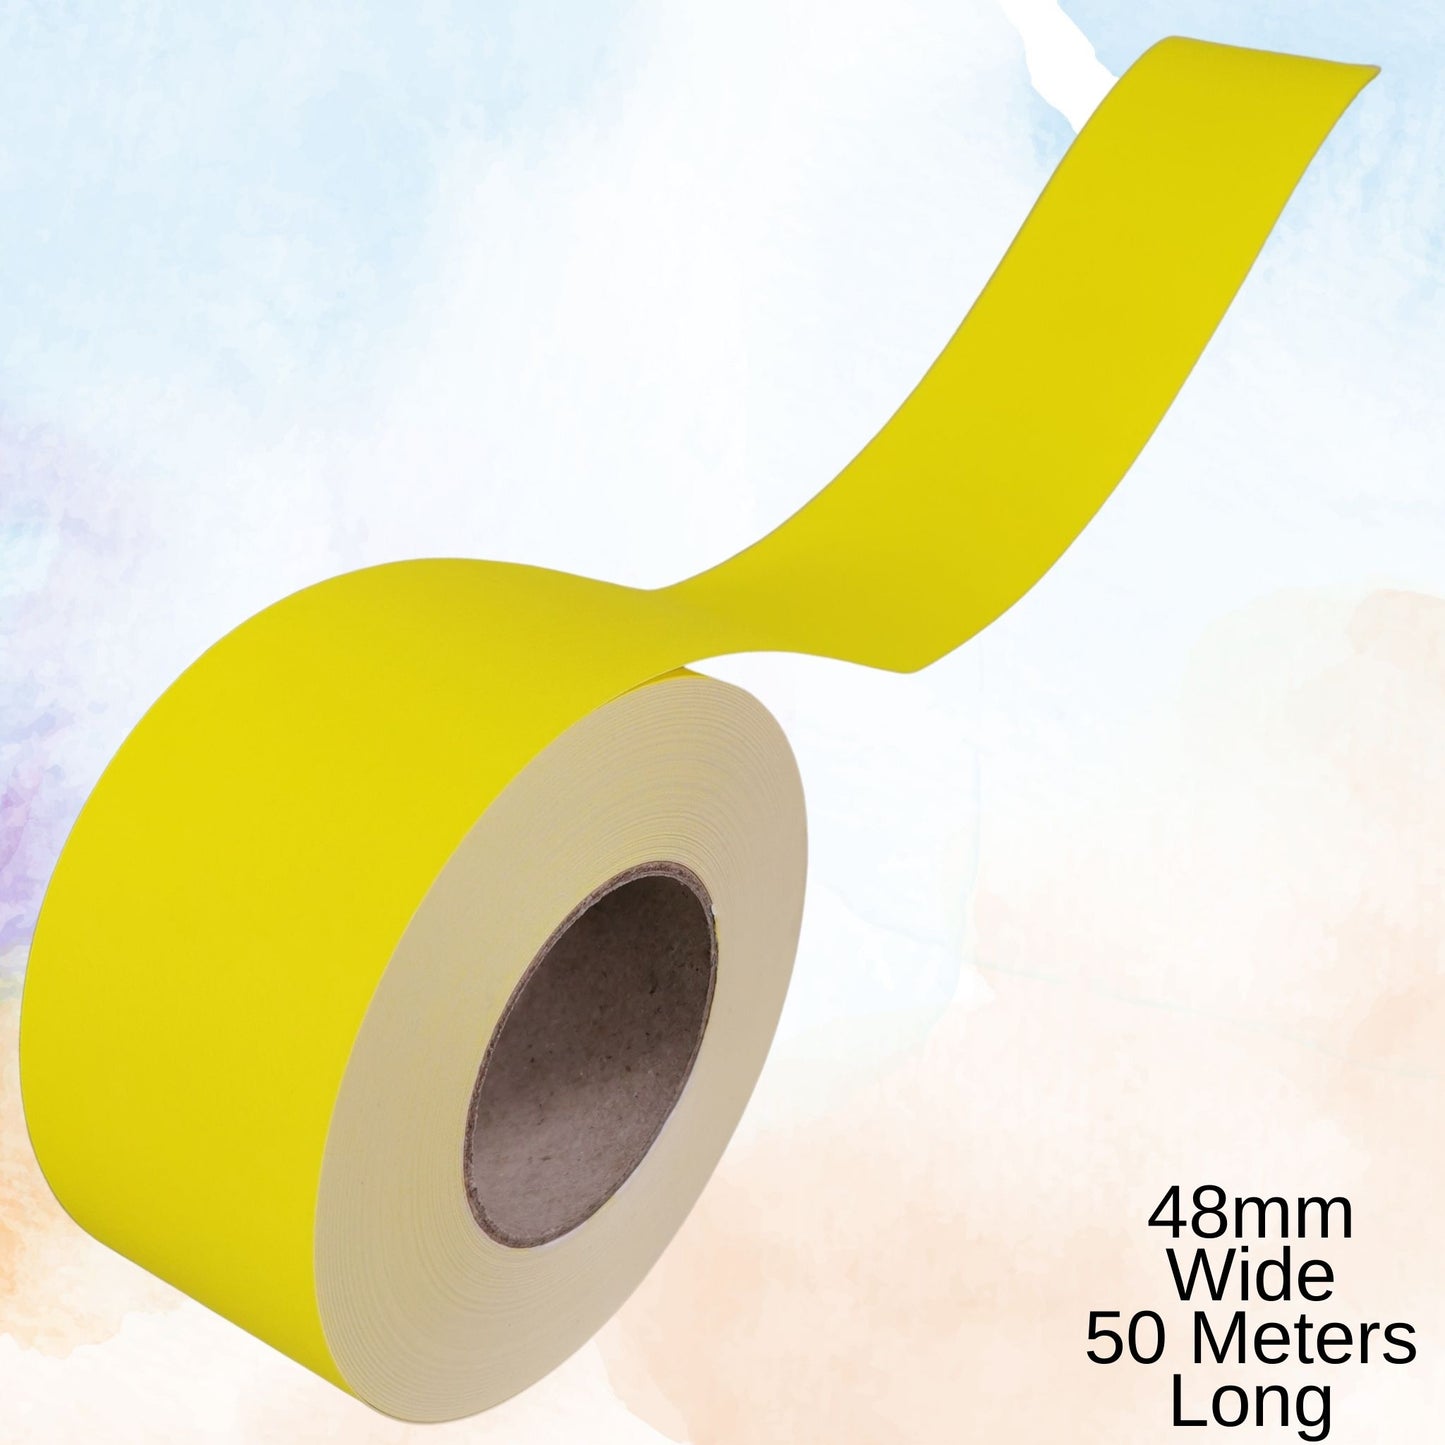 Straight Edge Border Roll 50m Display Borders For Walls, Display Boards & Classroom Decorations